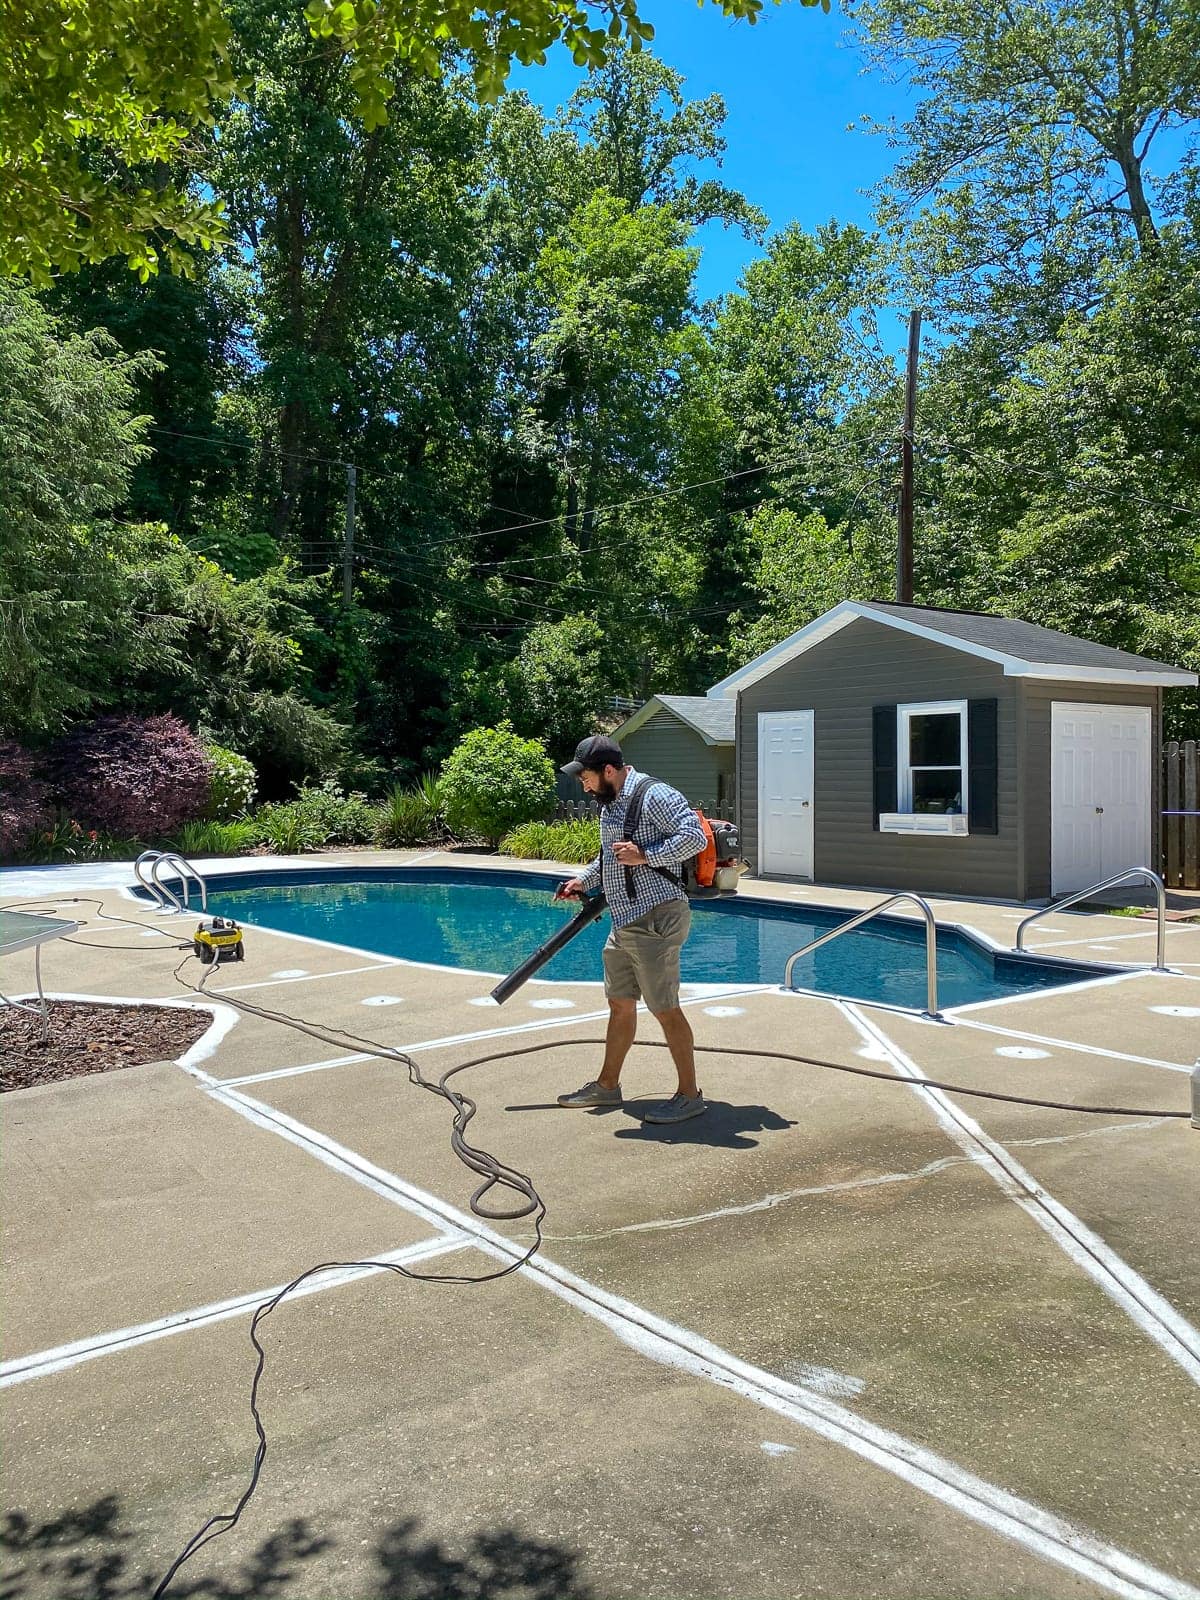 prepping a pool deck for painting by blowing off debris